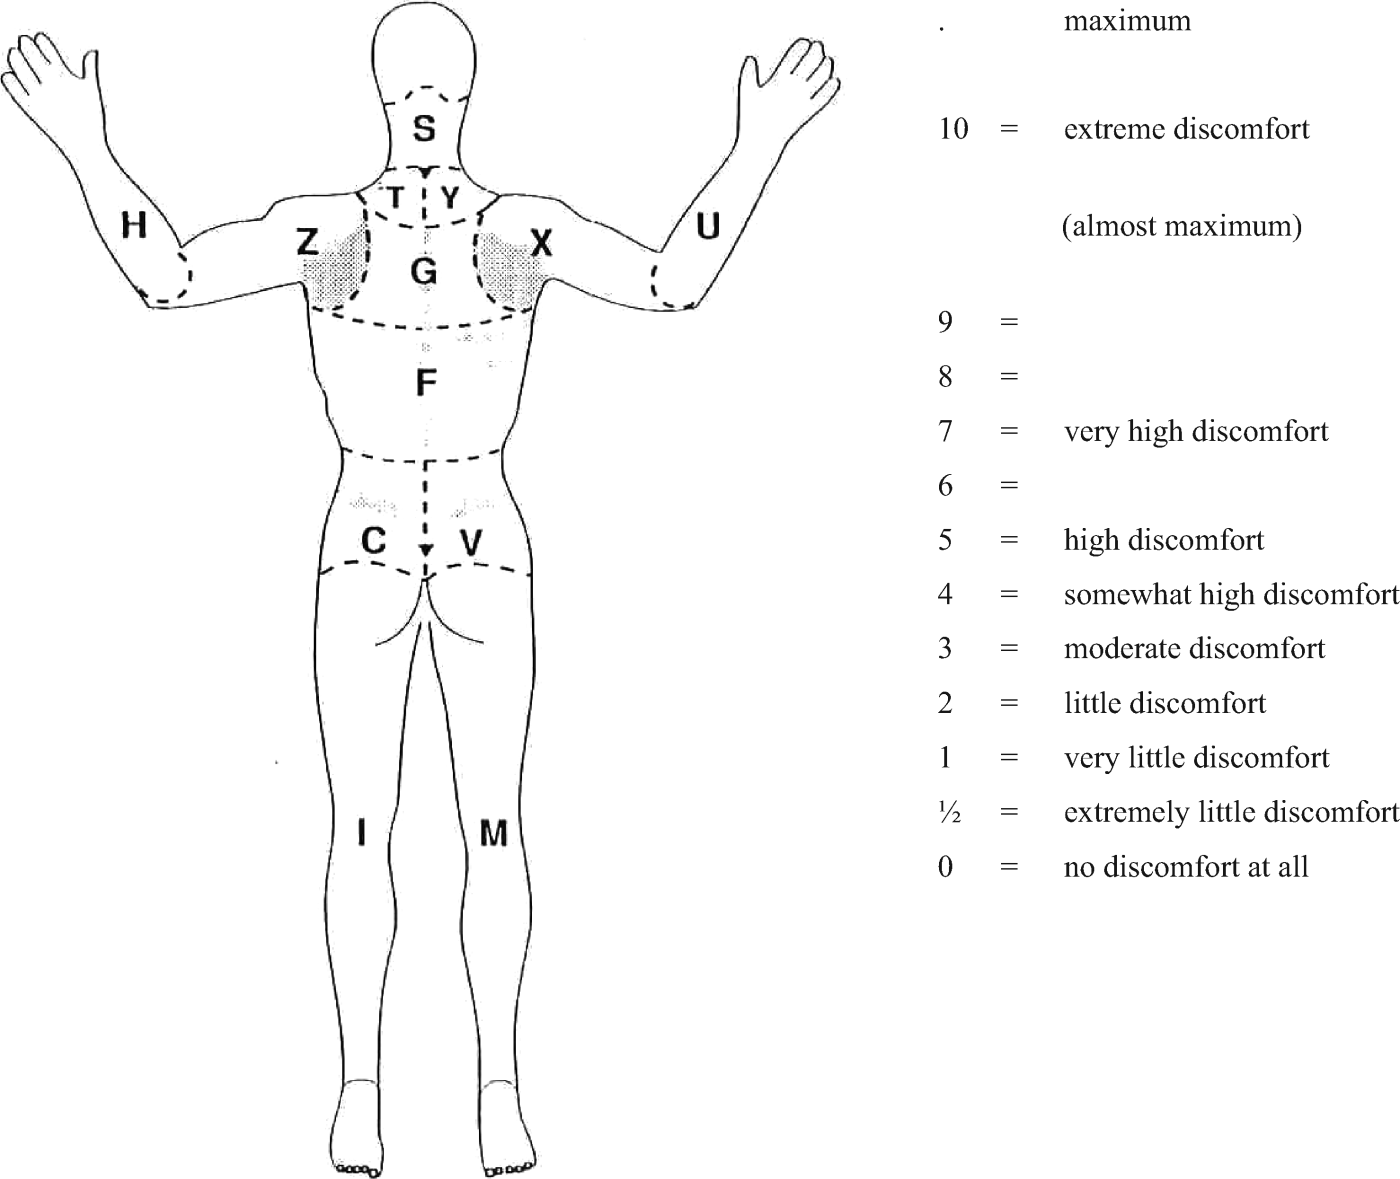 Digital body mapping of pain quality and distribution in athletes